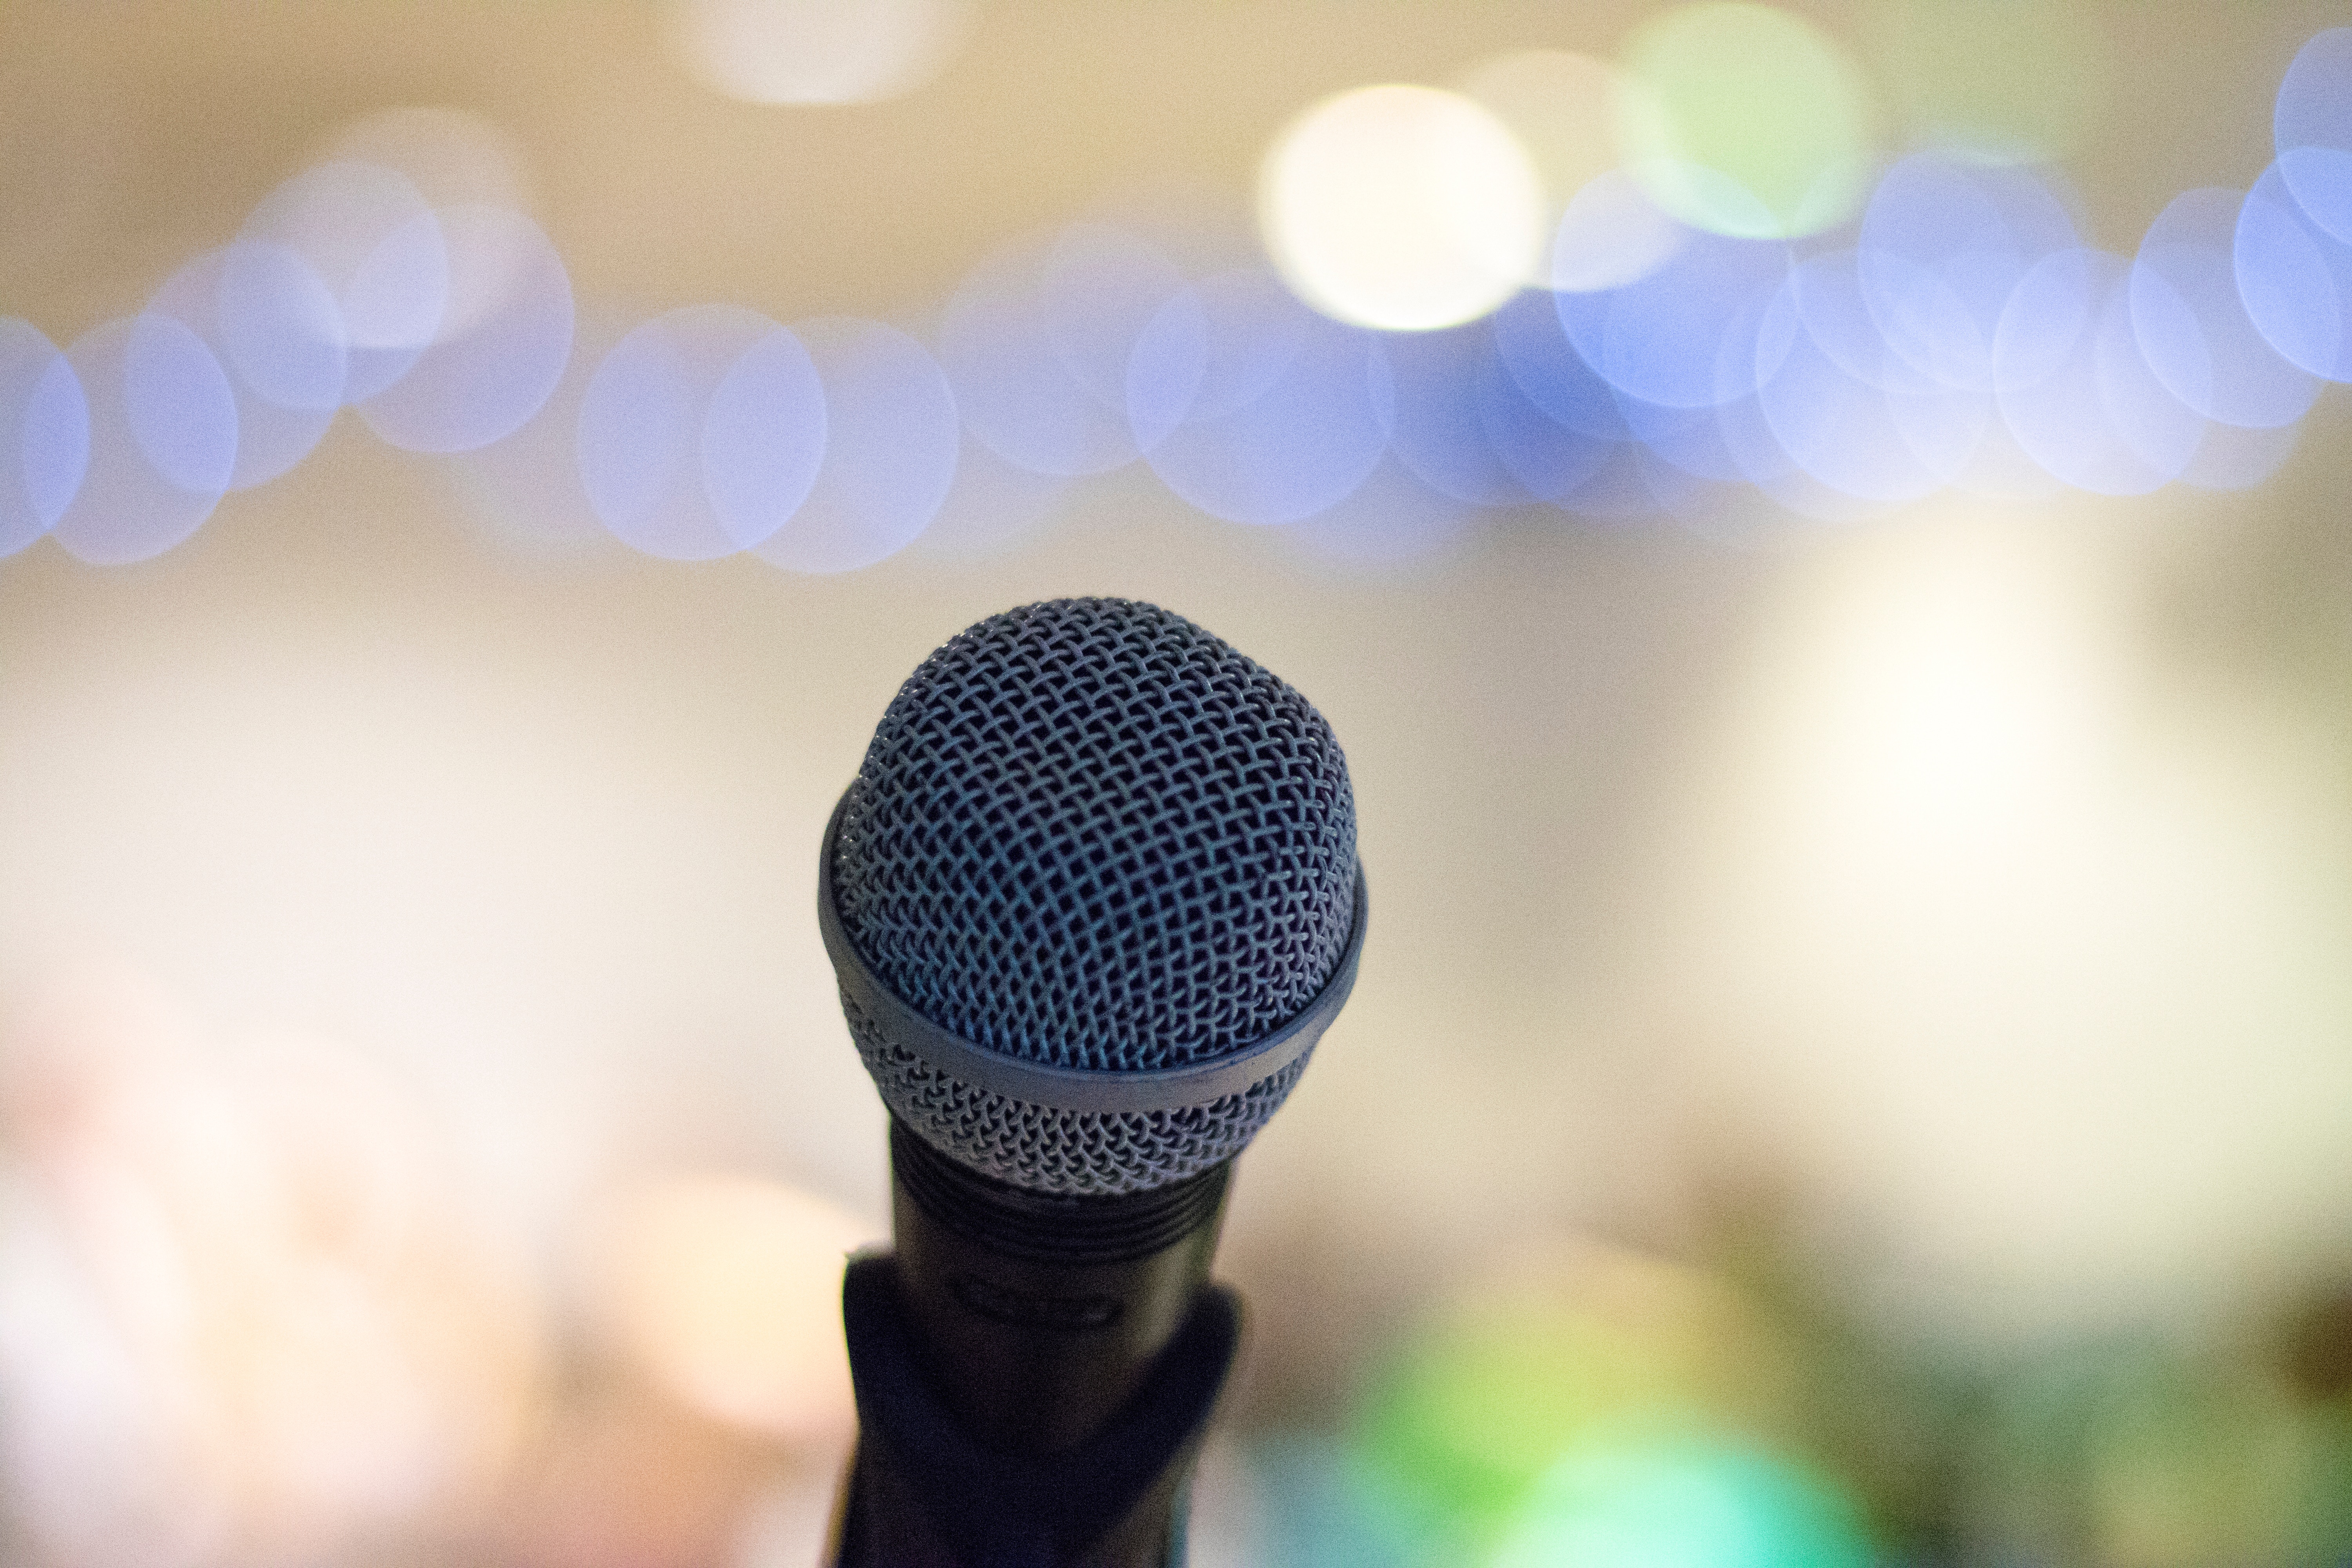 Microphone in stand by Elliot Sloman on Unsplash